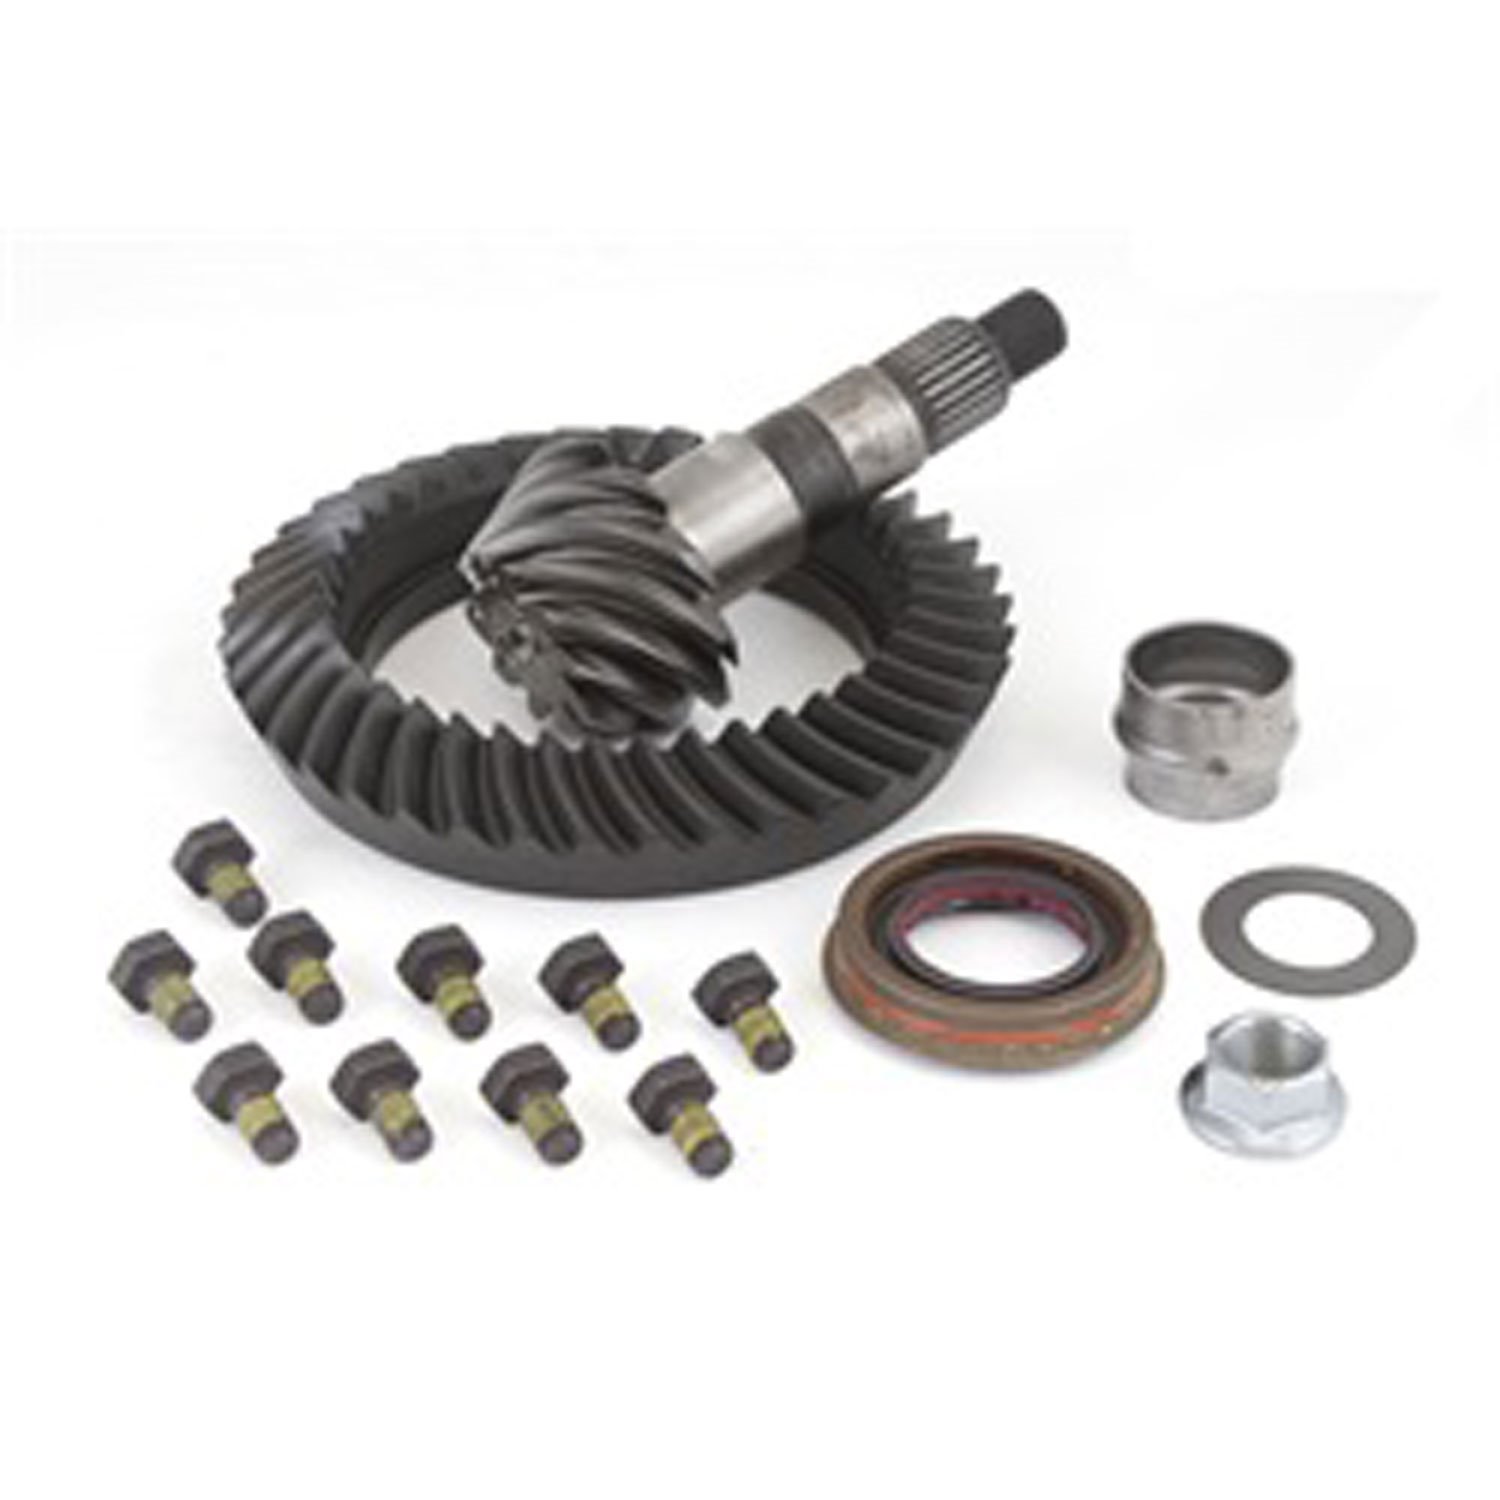 This 4.10 ratio ring and pinion gear set fits the Dana 44 rear axle used in 2007 Jeep Wranglers w/ T